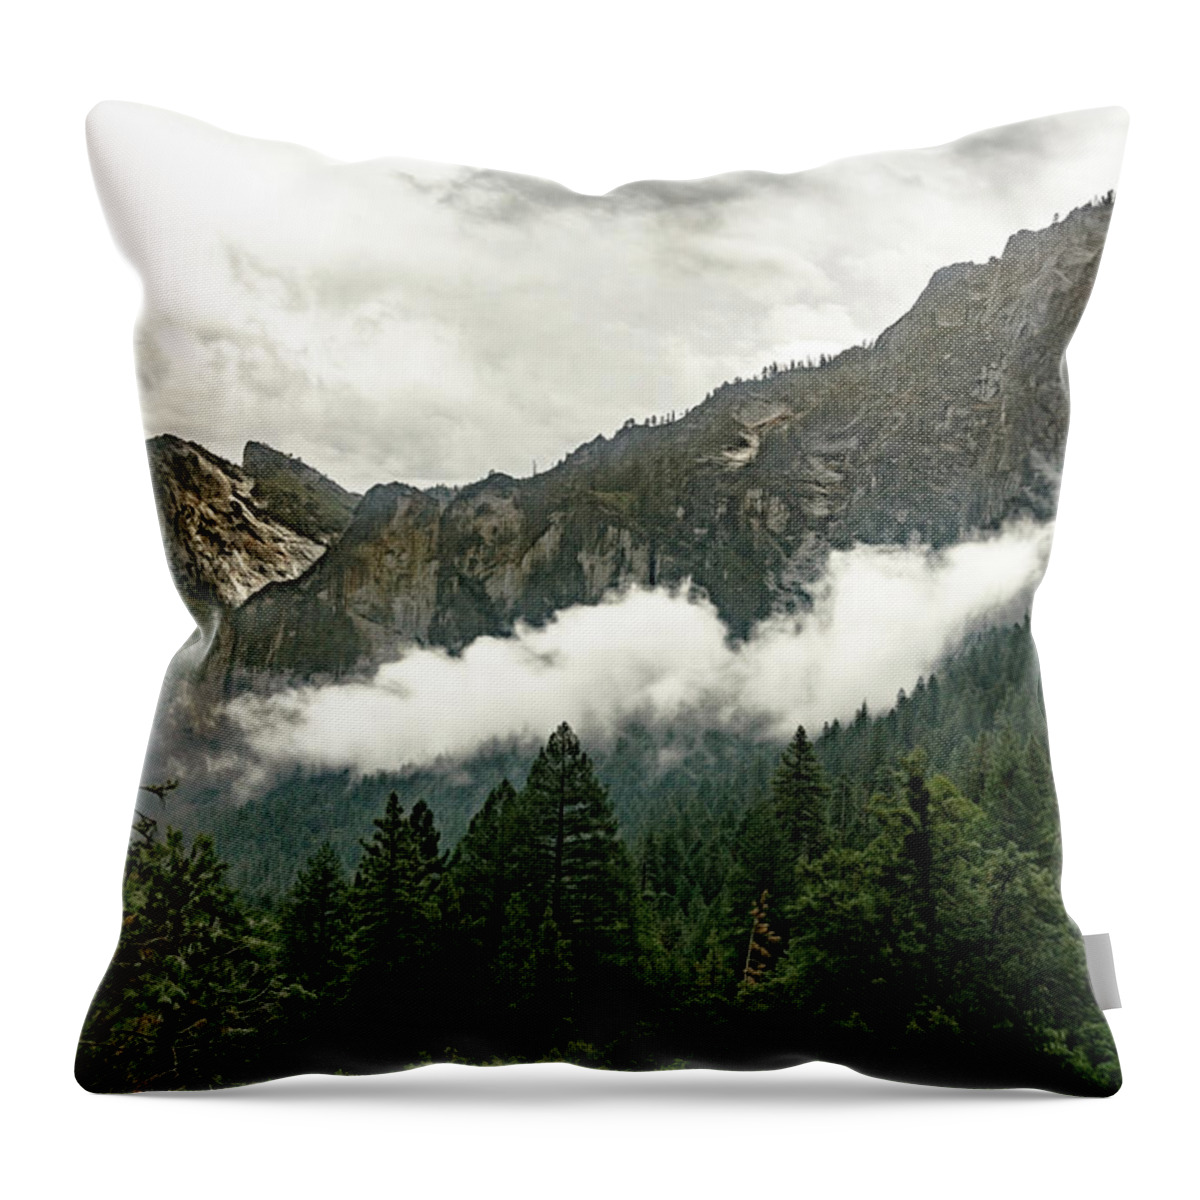 Skyline Throw Pillow featuring the photograph Yosemite Valley 8 by Silvia Marcoschamer